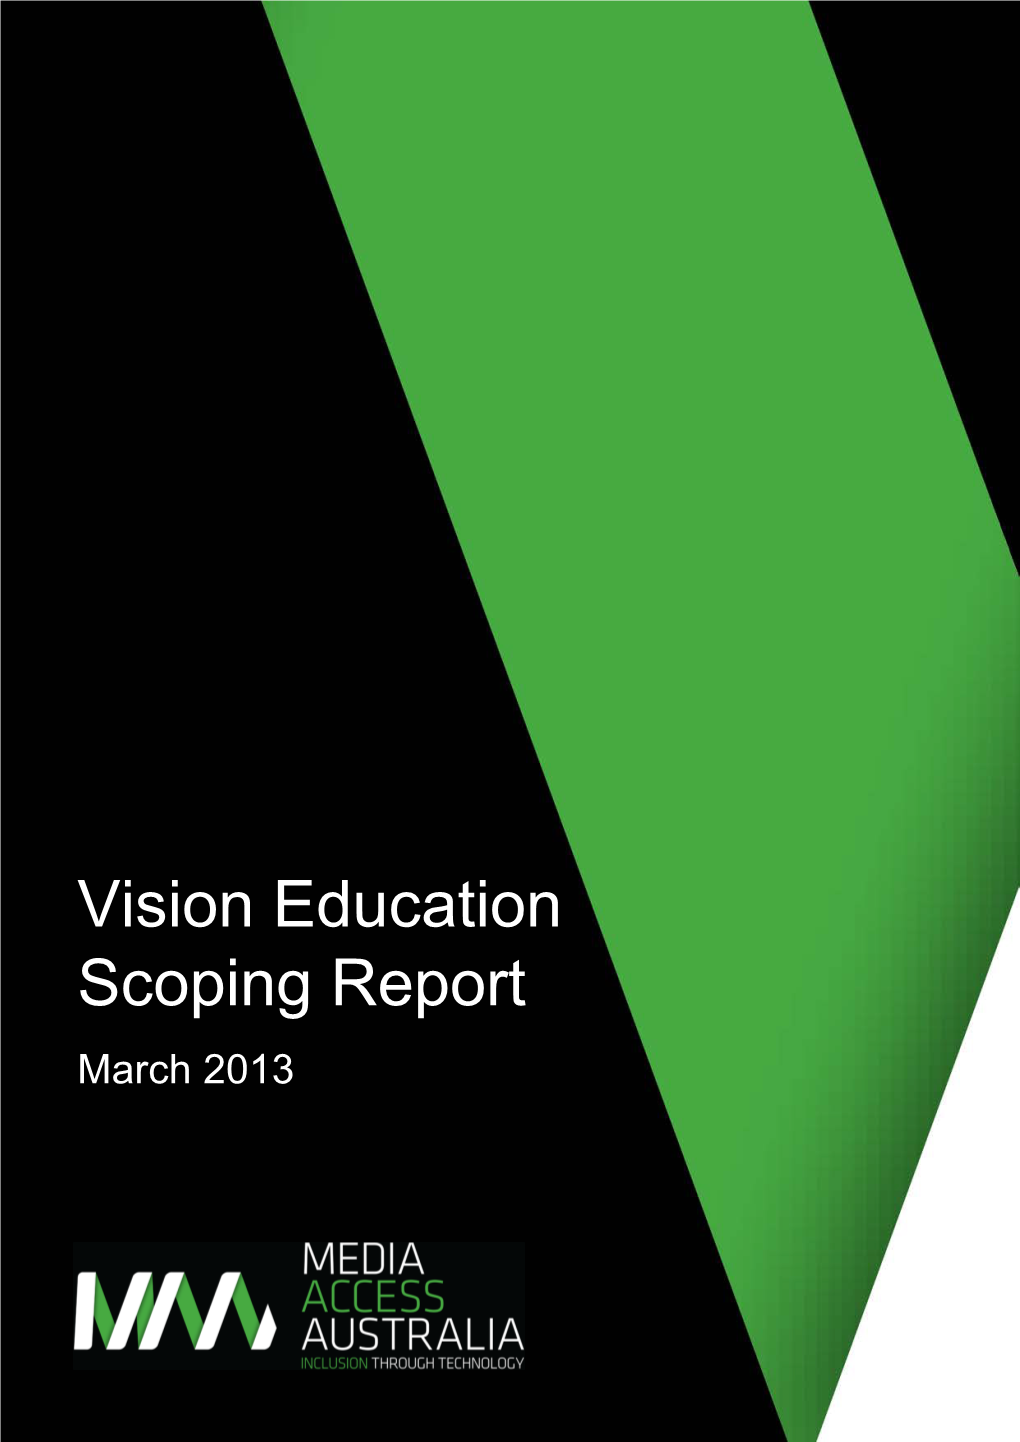 Vision Education Scoping Report March 2013